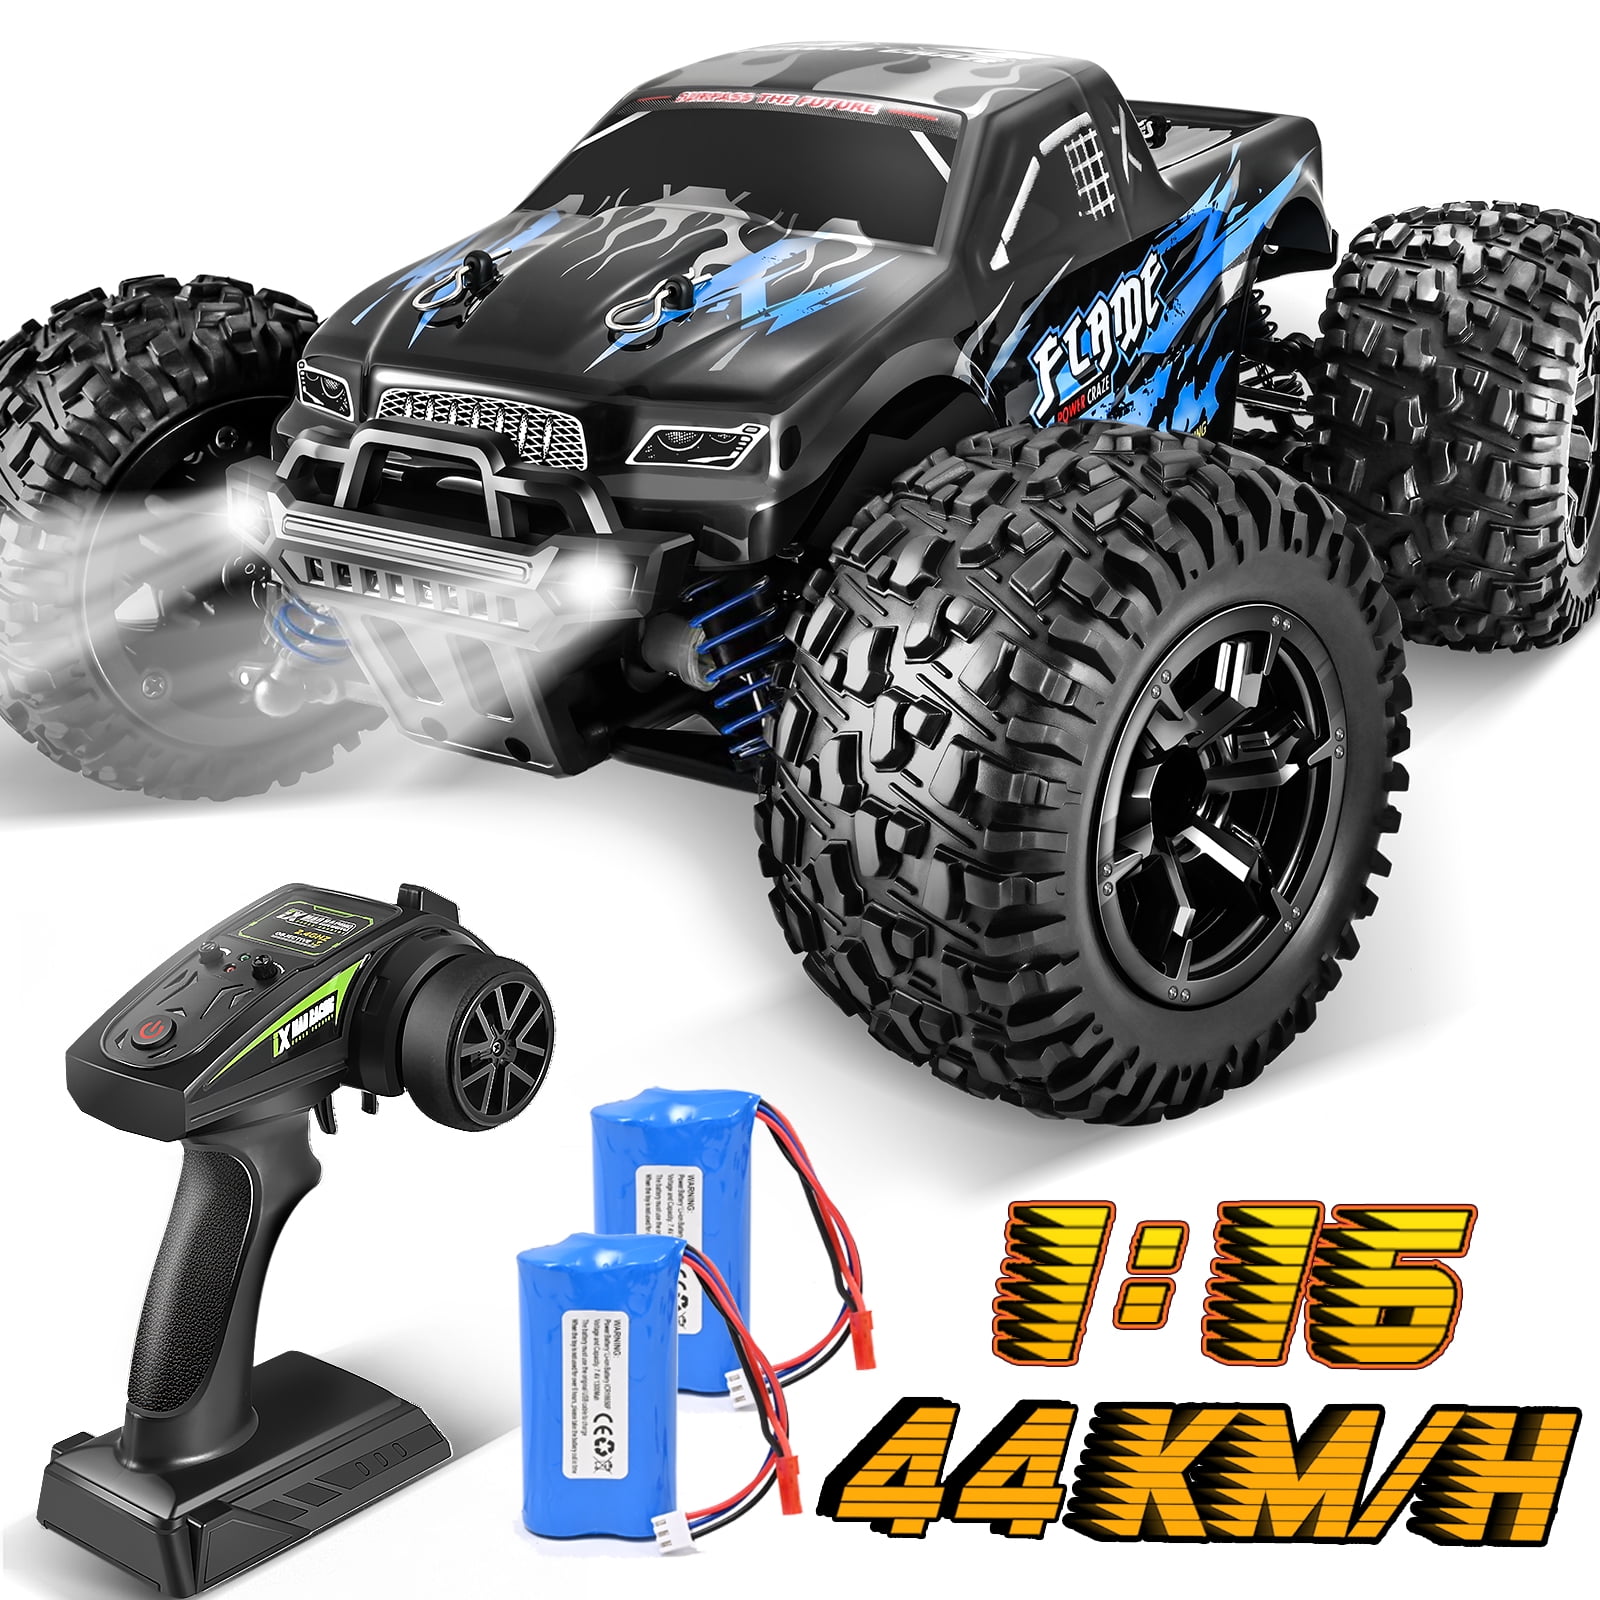 18cm 1/24 Mini 4wd Drift Rc Cars For Kids Boy Gifts Remote Control Car  Model Toy Ferngesteuertes Auto Carros A Control Remoto - Rc Cars -  AliExpress